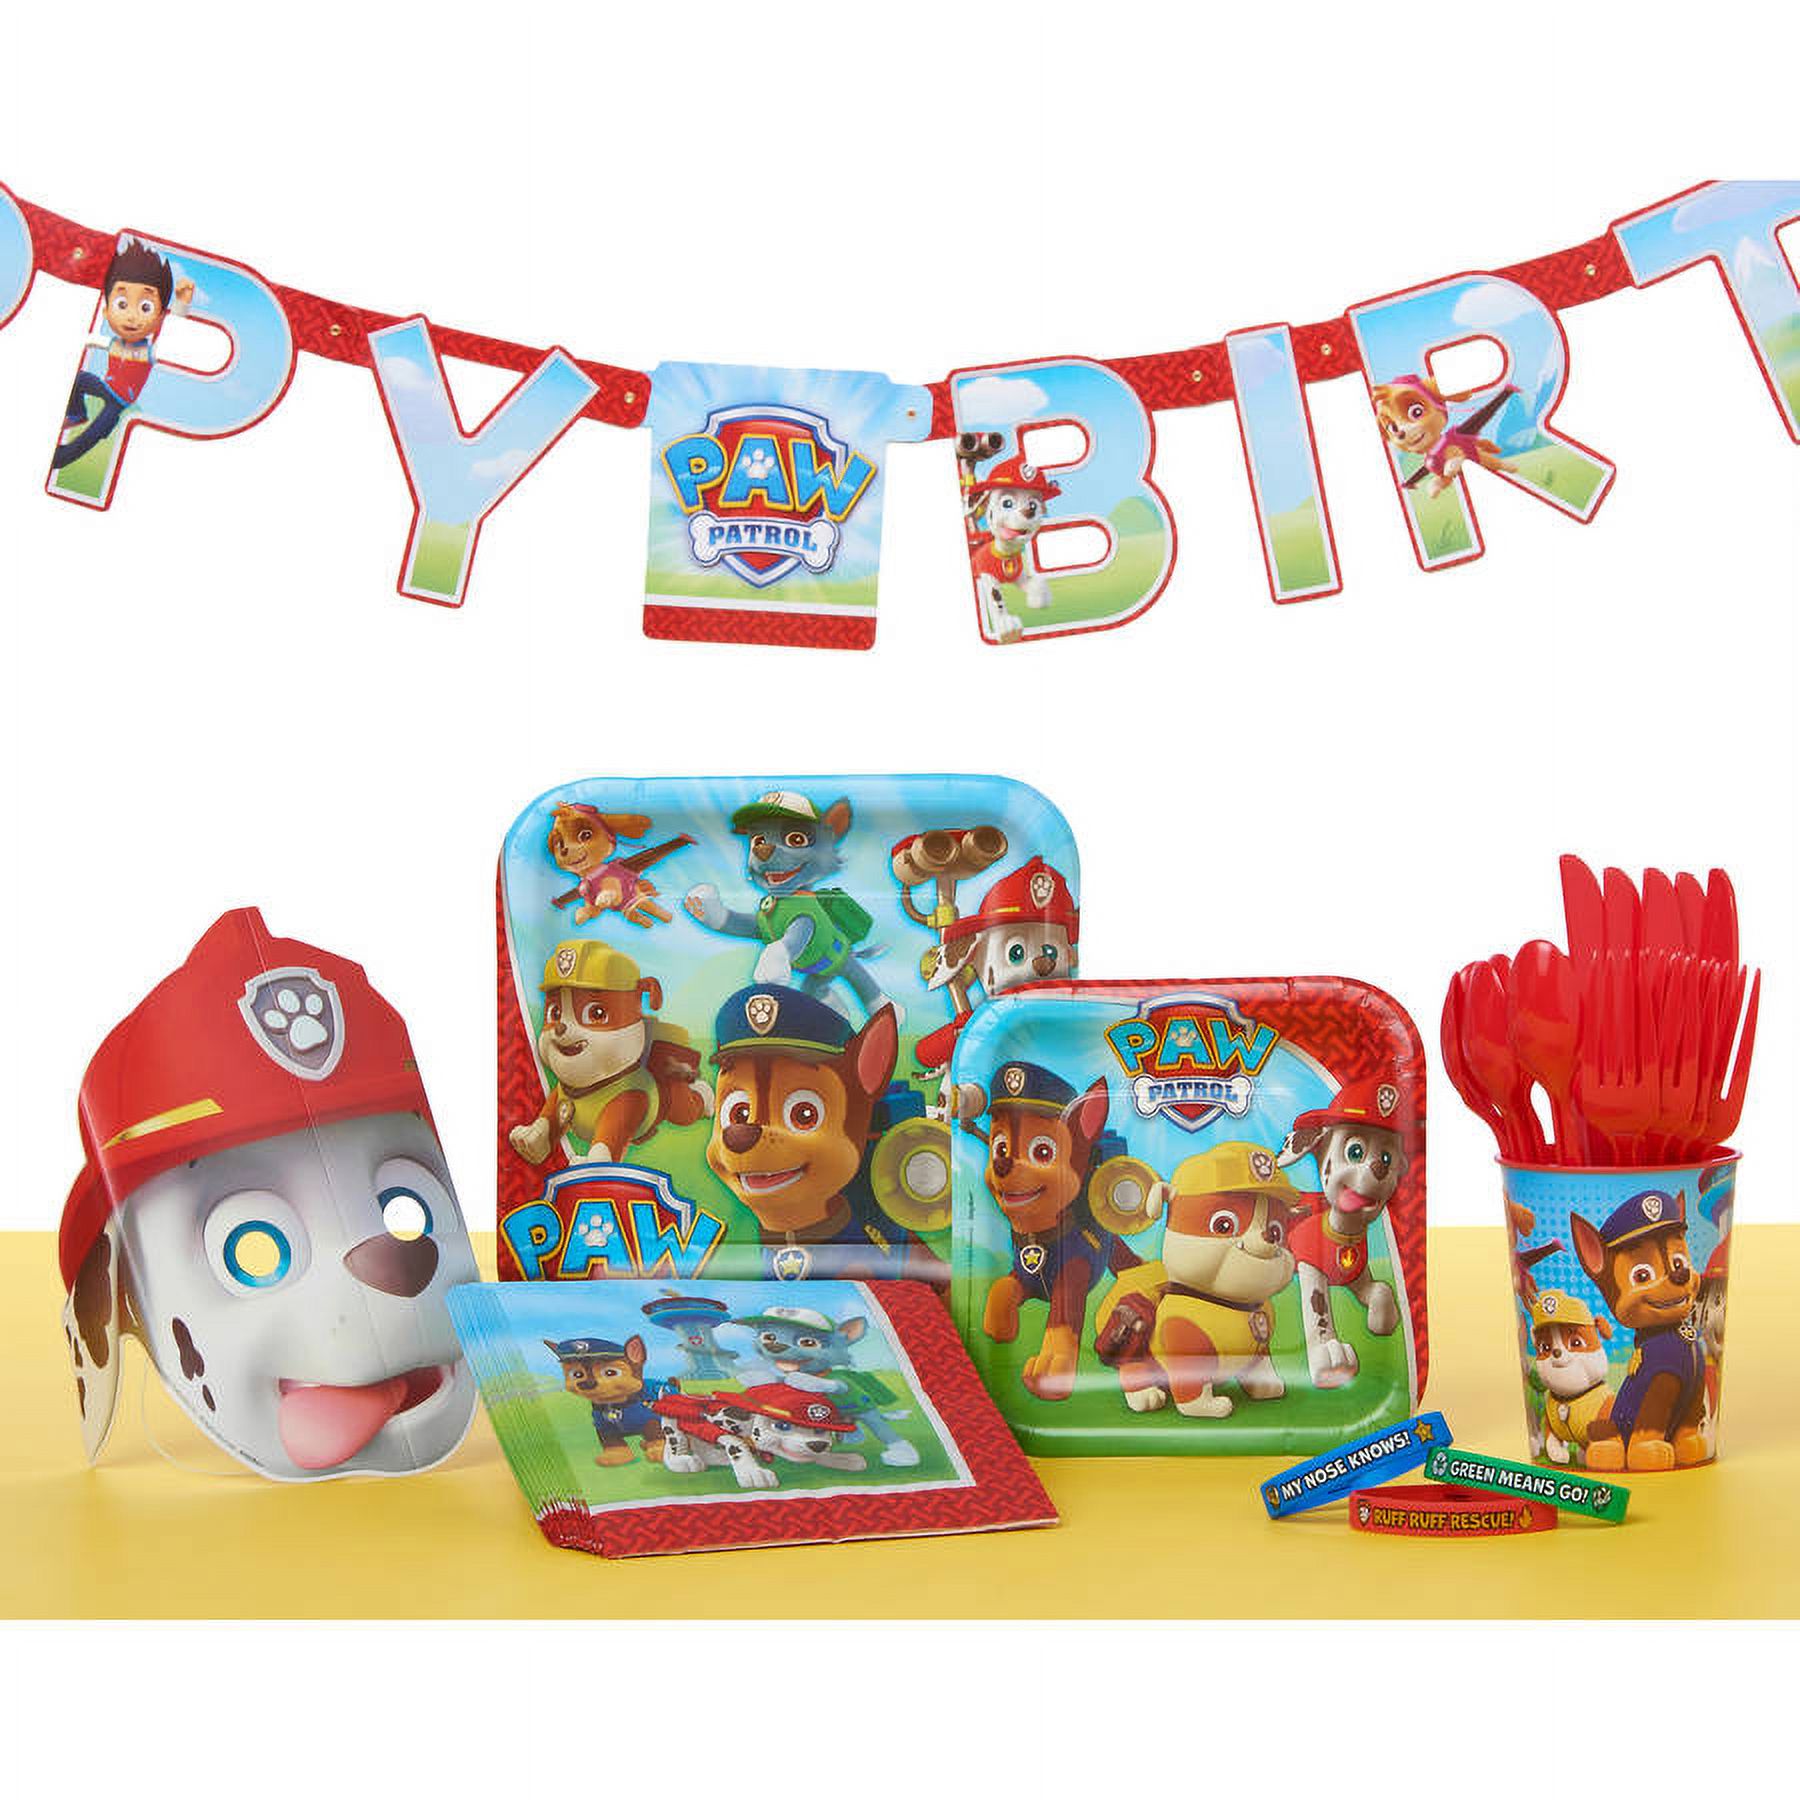 9" PAW Patrol Square Paper Party Plate, 8ct - image 3 of 3